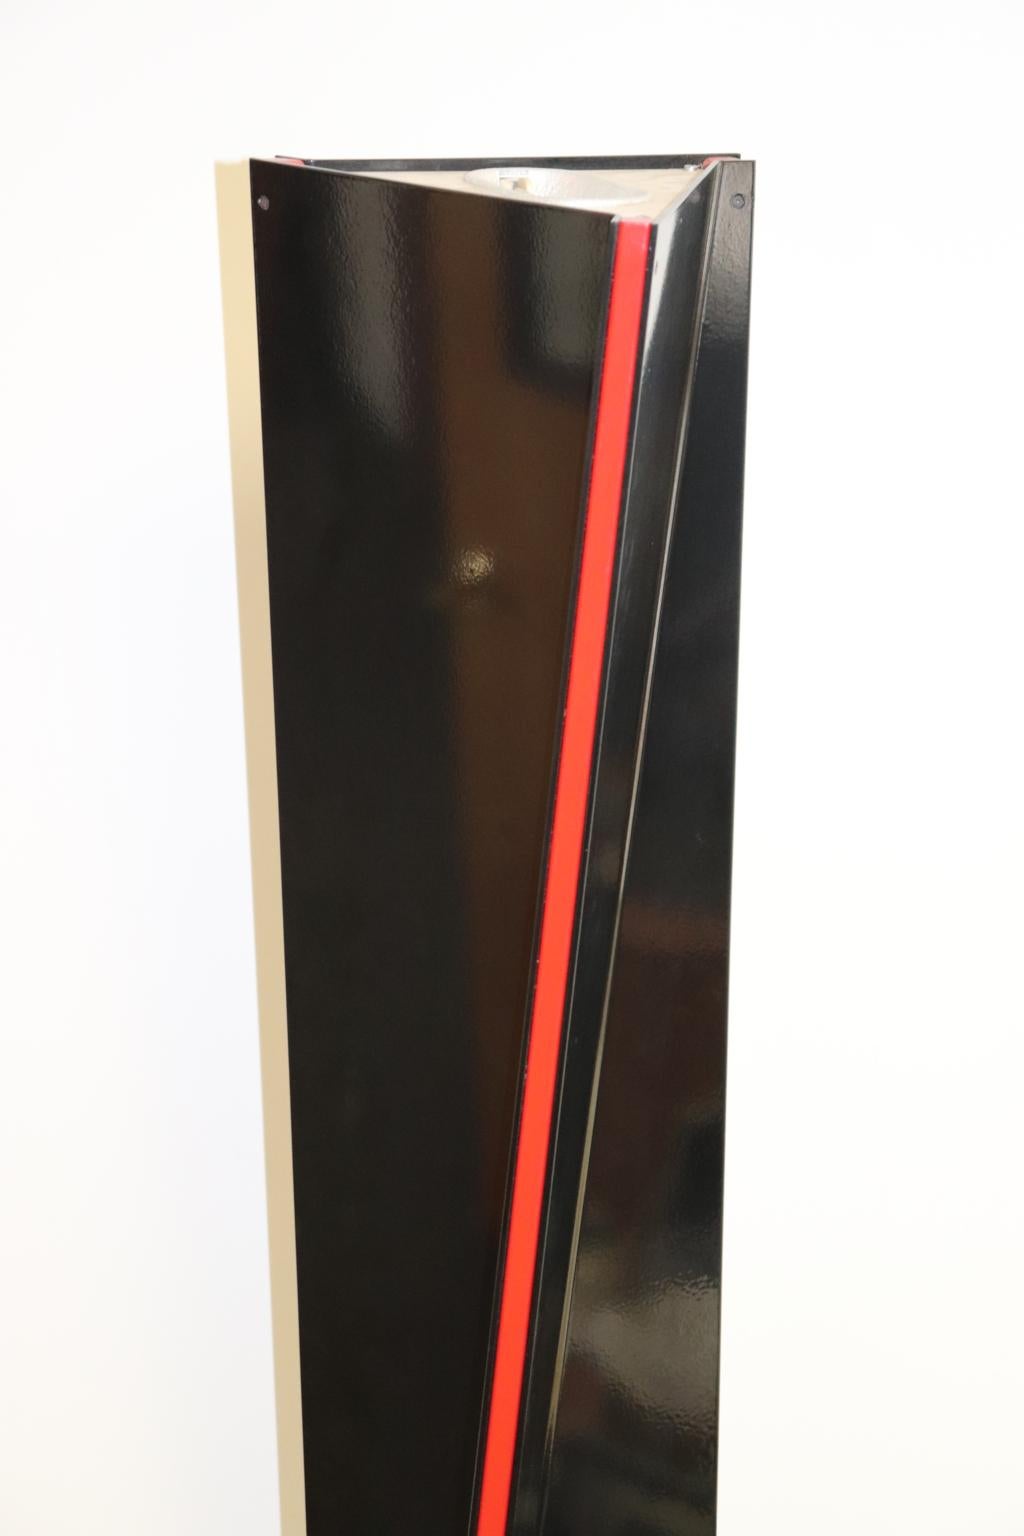 Mauro Marzollo Sculptured Floor Lamp Black with Red Stripes Details For Sale 3